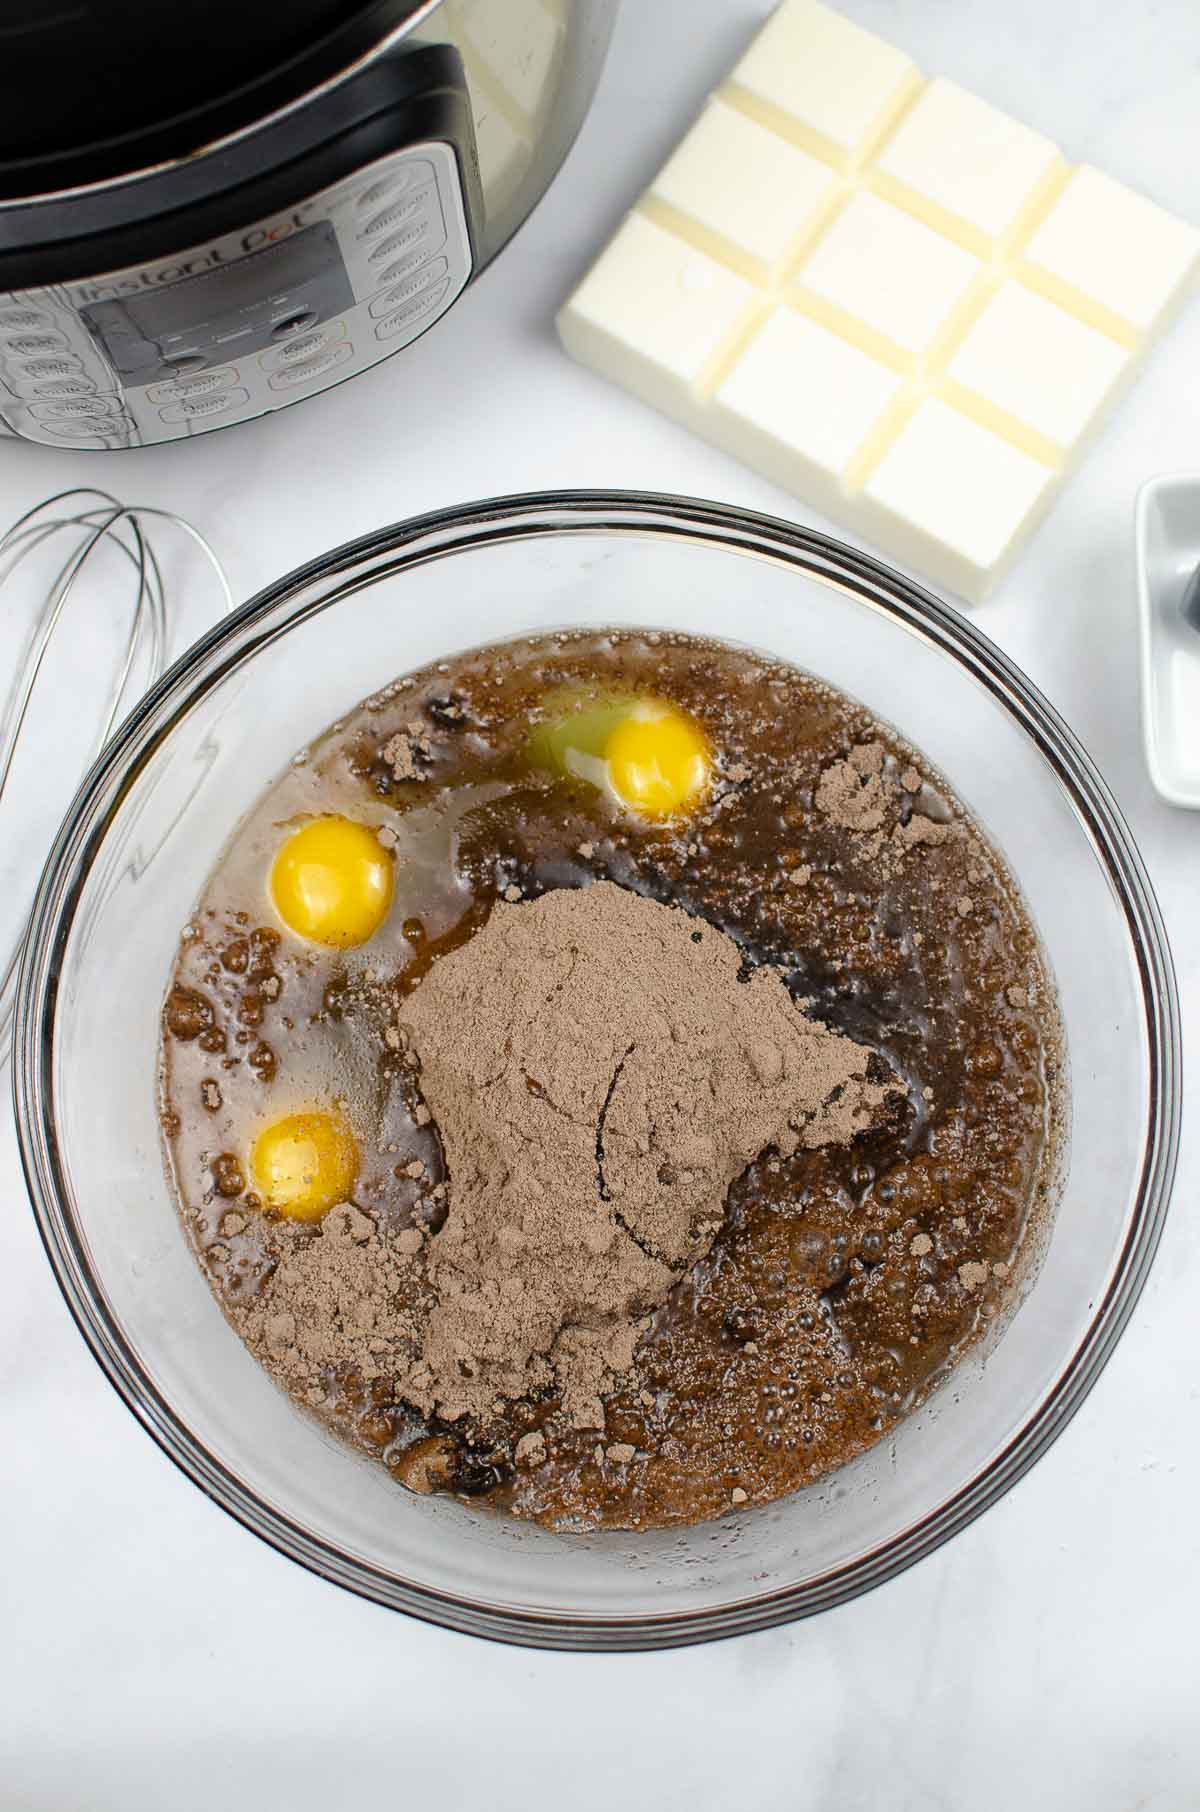 Ingredients to make Devil's food cake from a box in a bowl: cake mix, 3 eggs, oil.